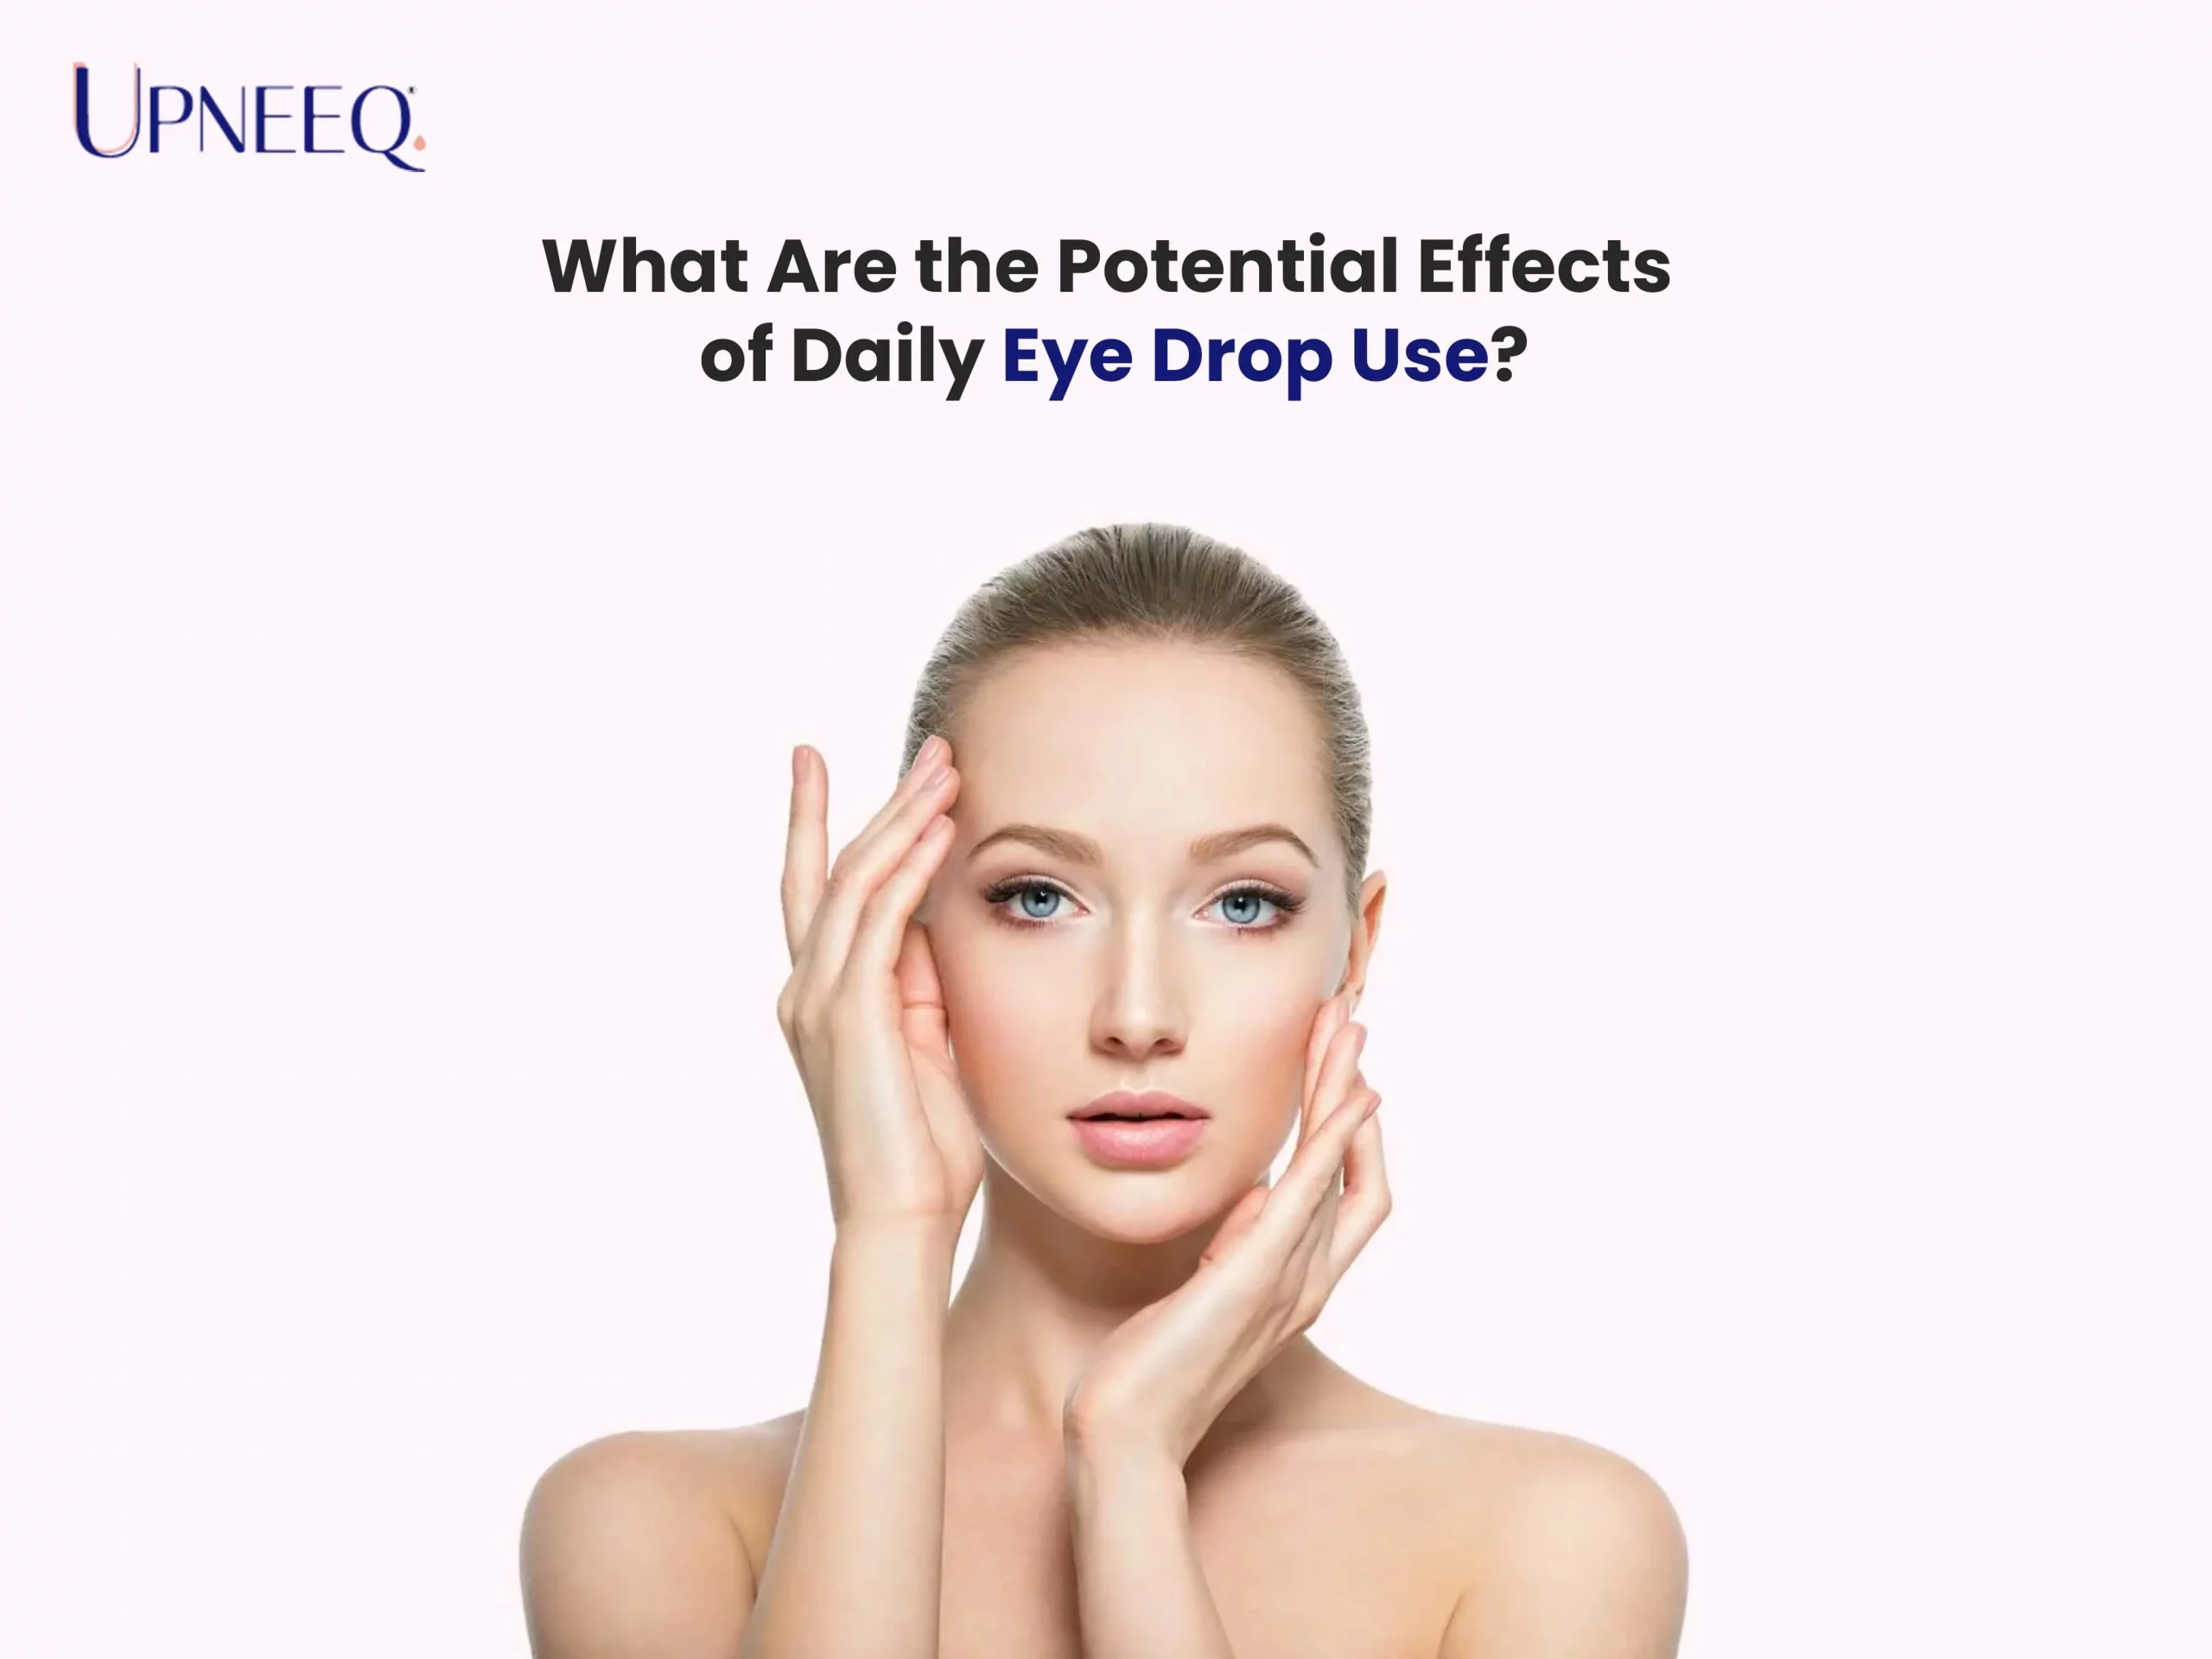 What Are the Potential Effects of Daily Eye Drop Use?